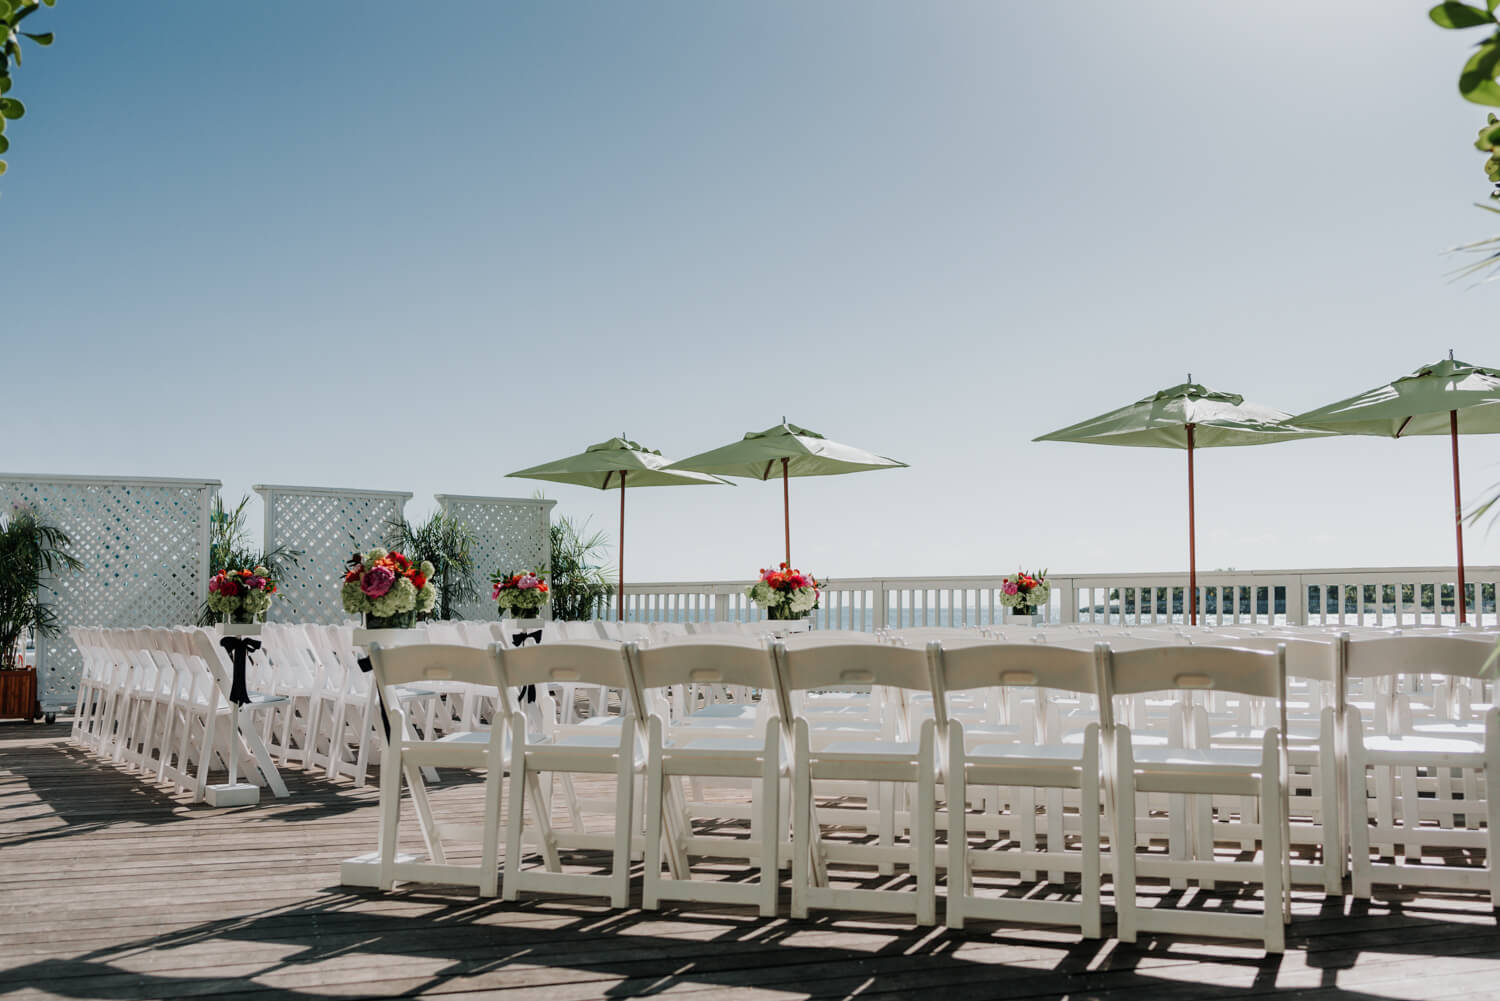 An Ocean Key Resort Spa wedding ceremony with white chairs and umbrellas.